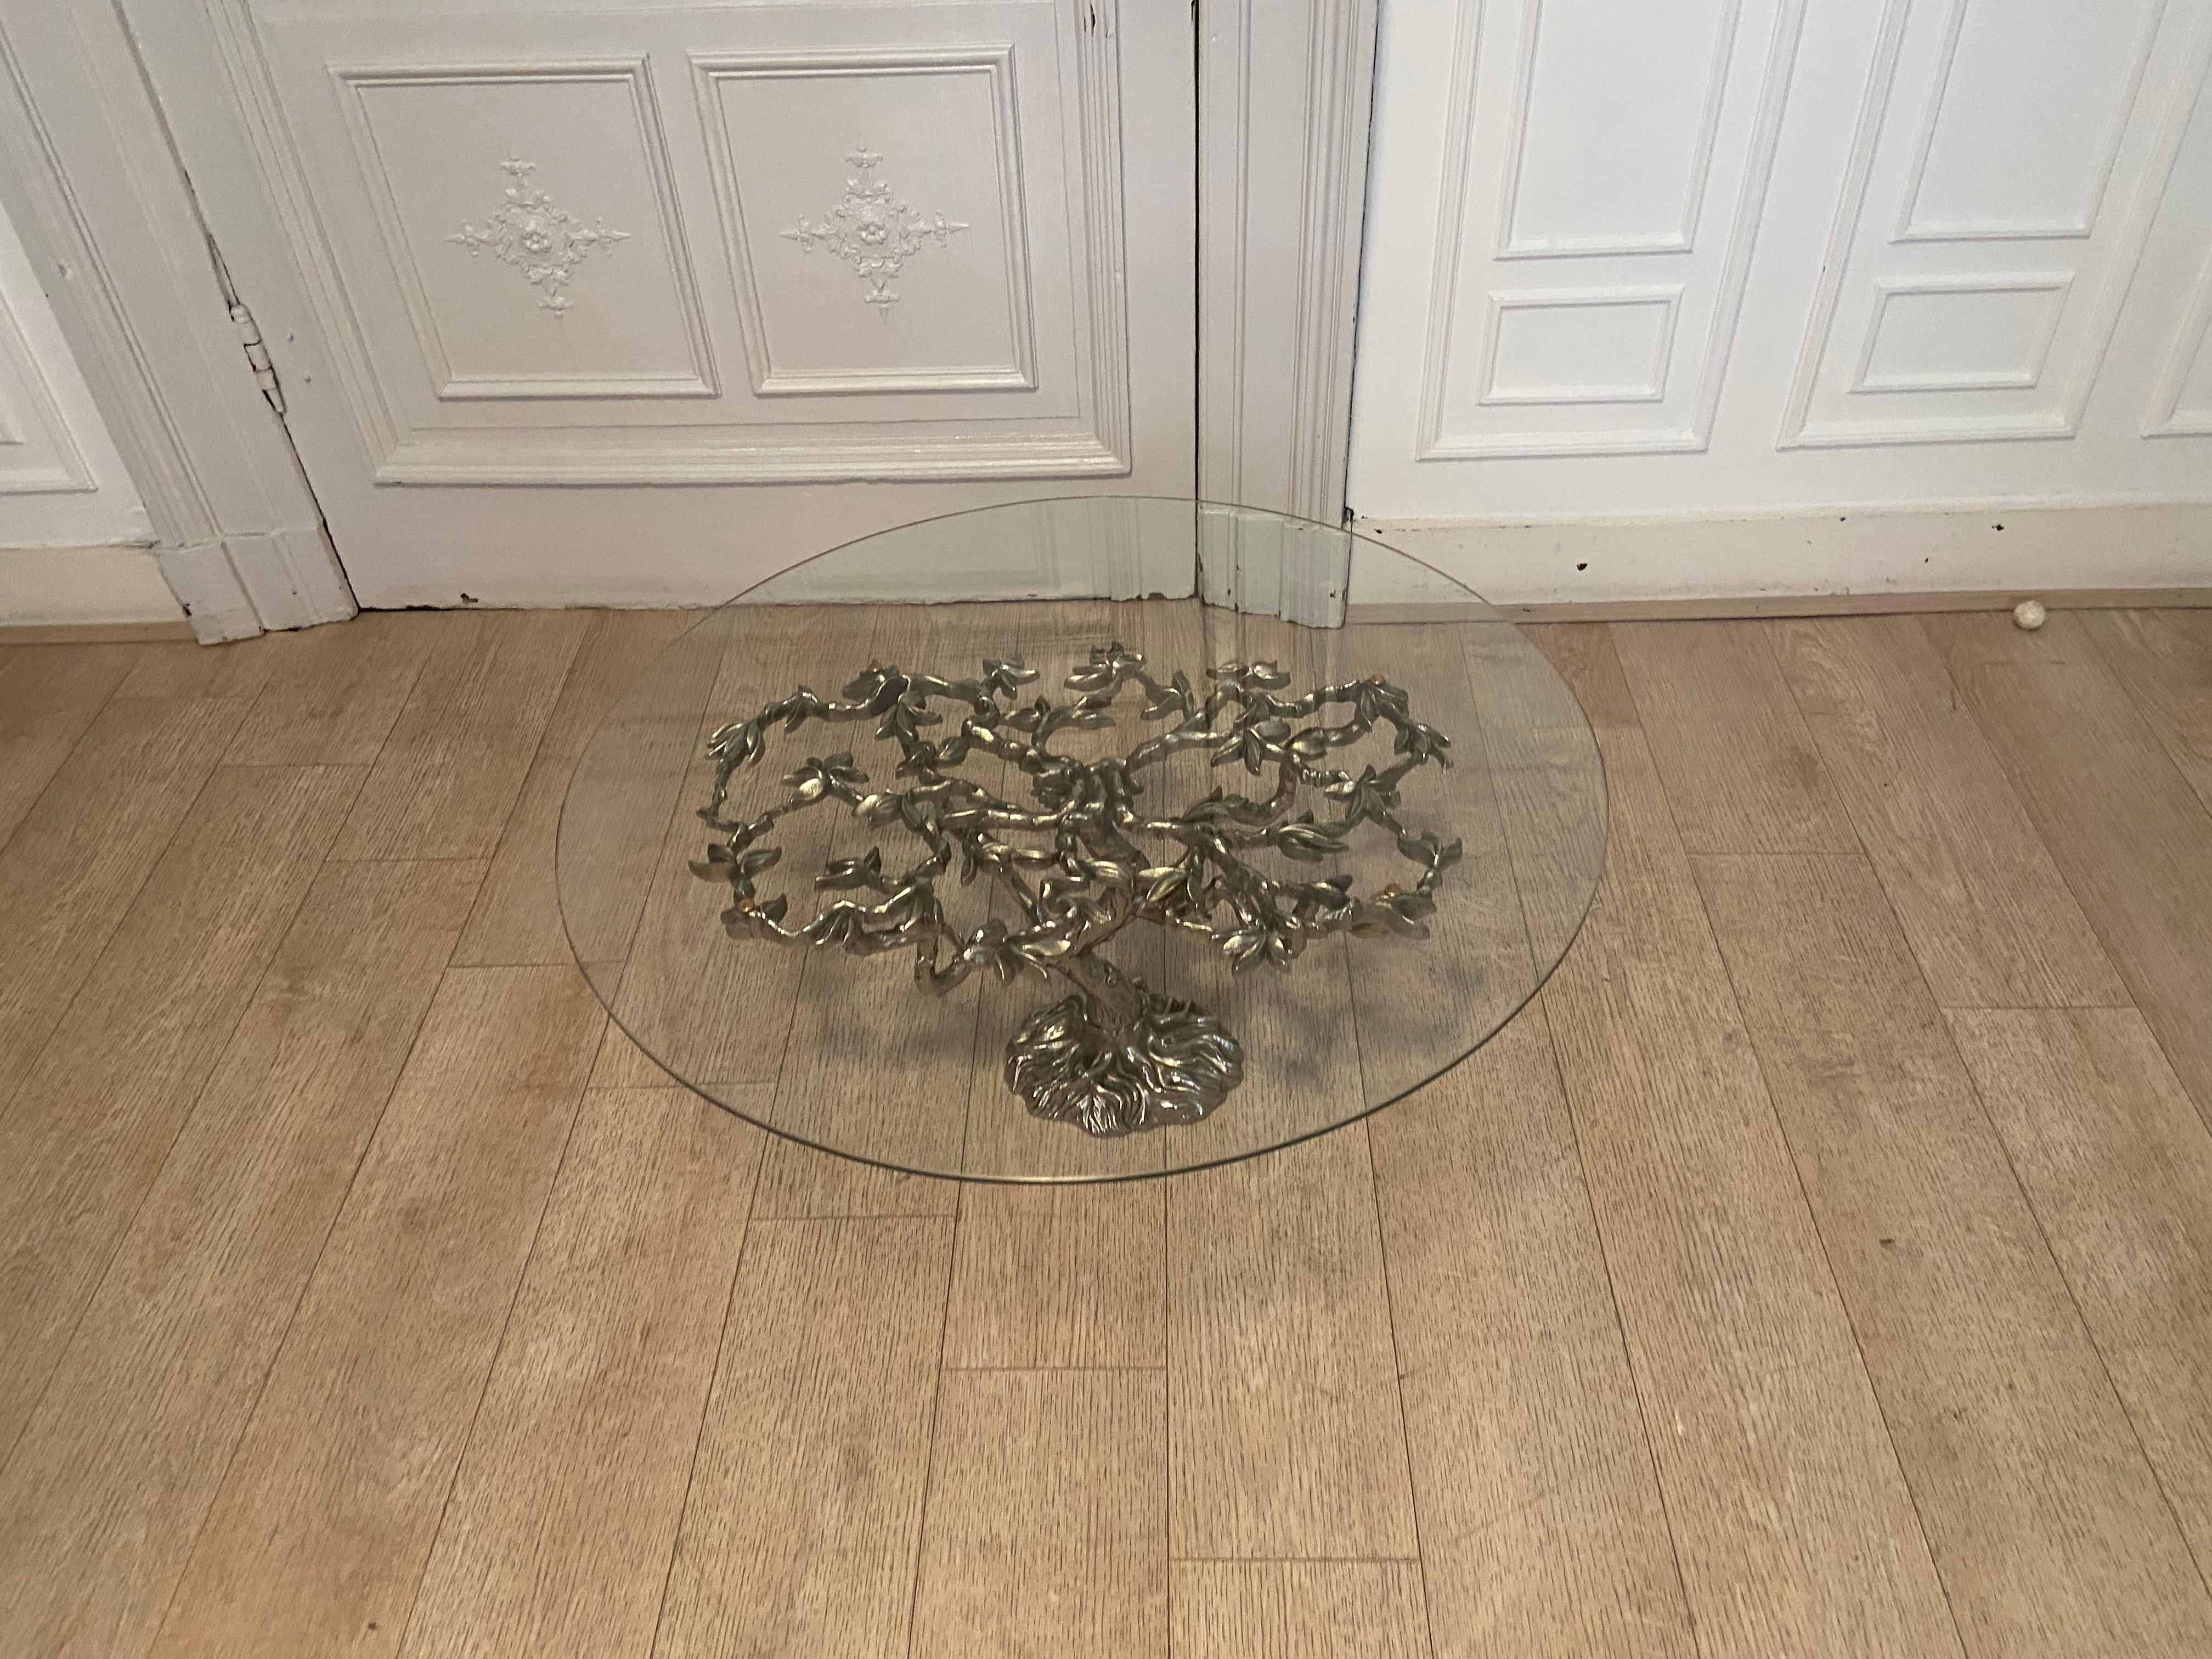 European Mid Century Coffee Table in Silver Color from the 1970s Design with Vegetable